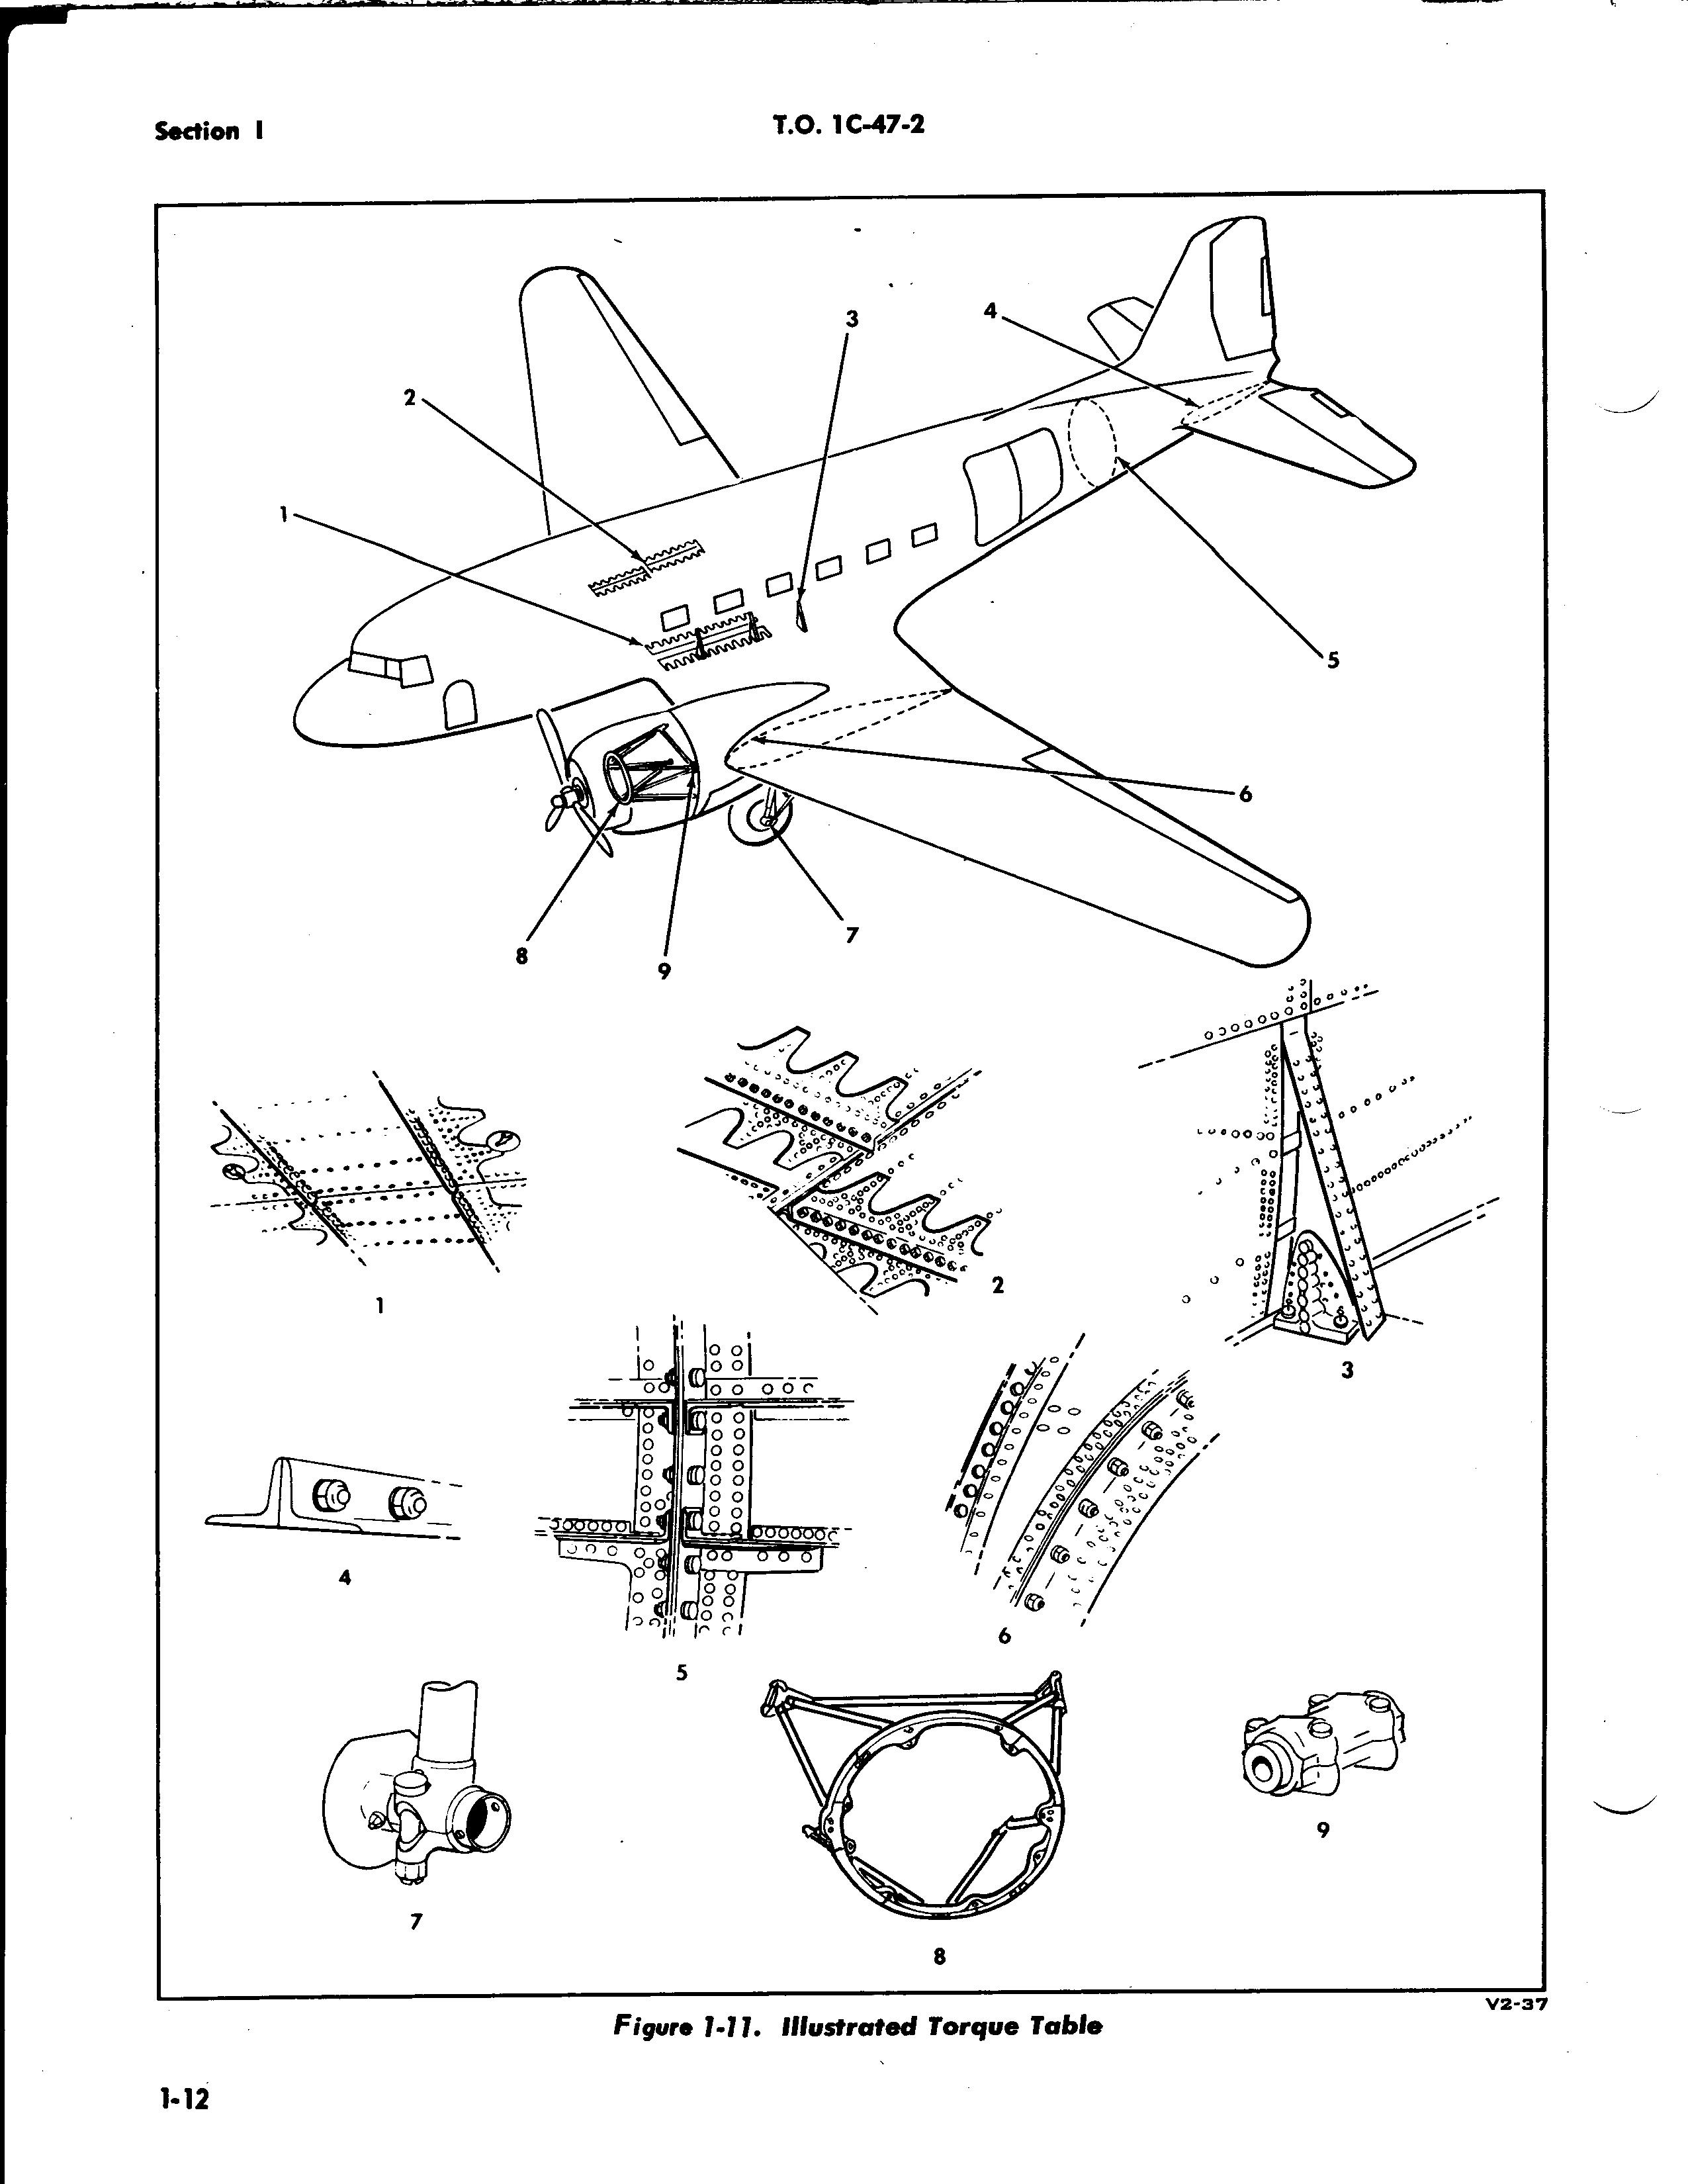 Sample page 56 from AirCorps Library document: Maintenance Instructions for C-47, A, B, D, C-117A and C-117B Aircraft